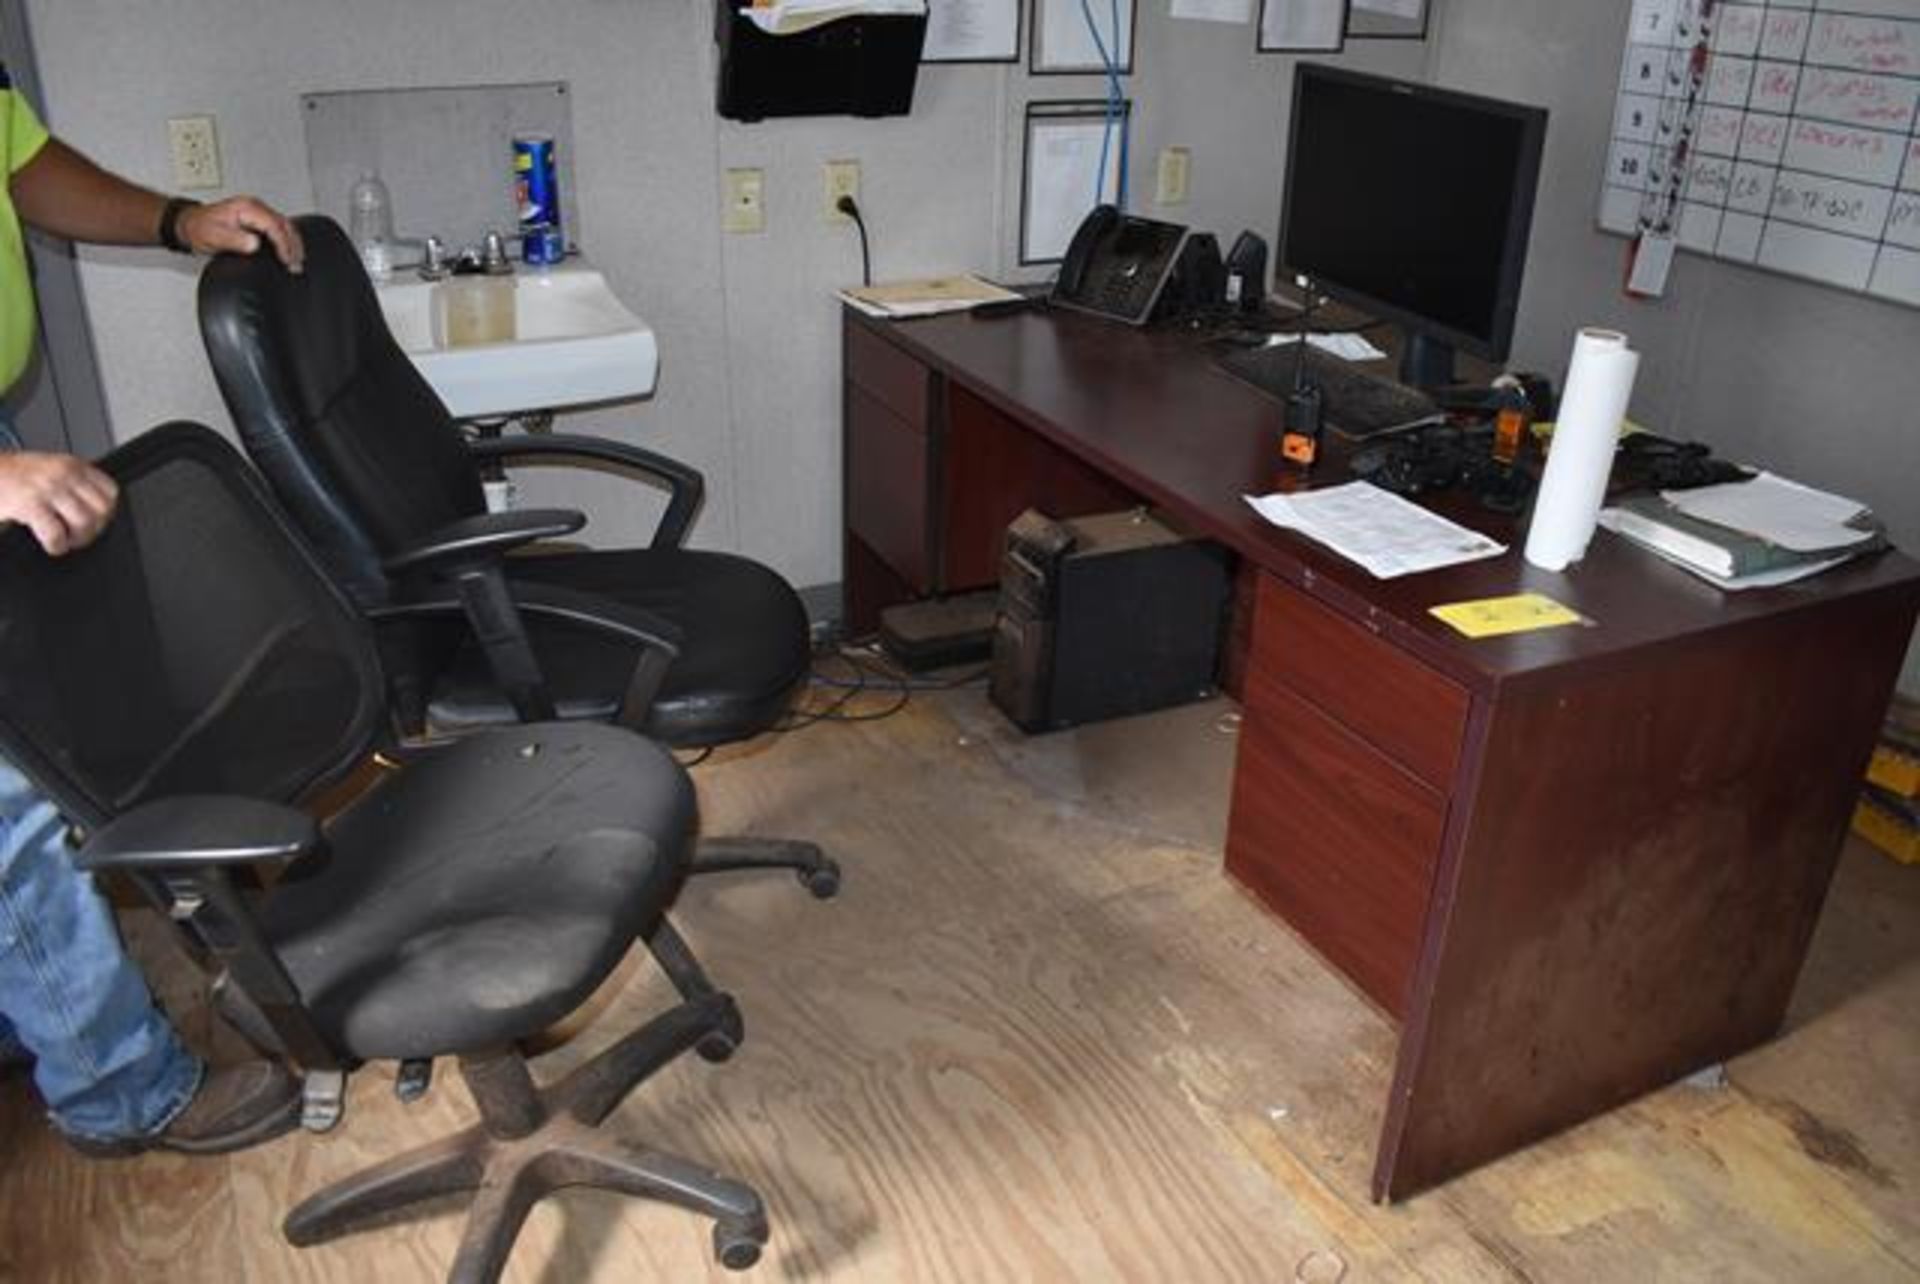 Office Contents - Desk, Microwave, File Cabinets